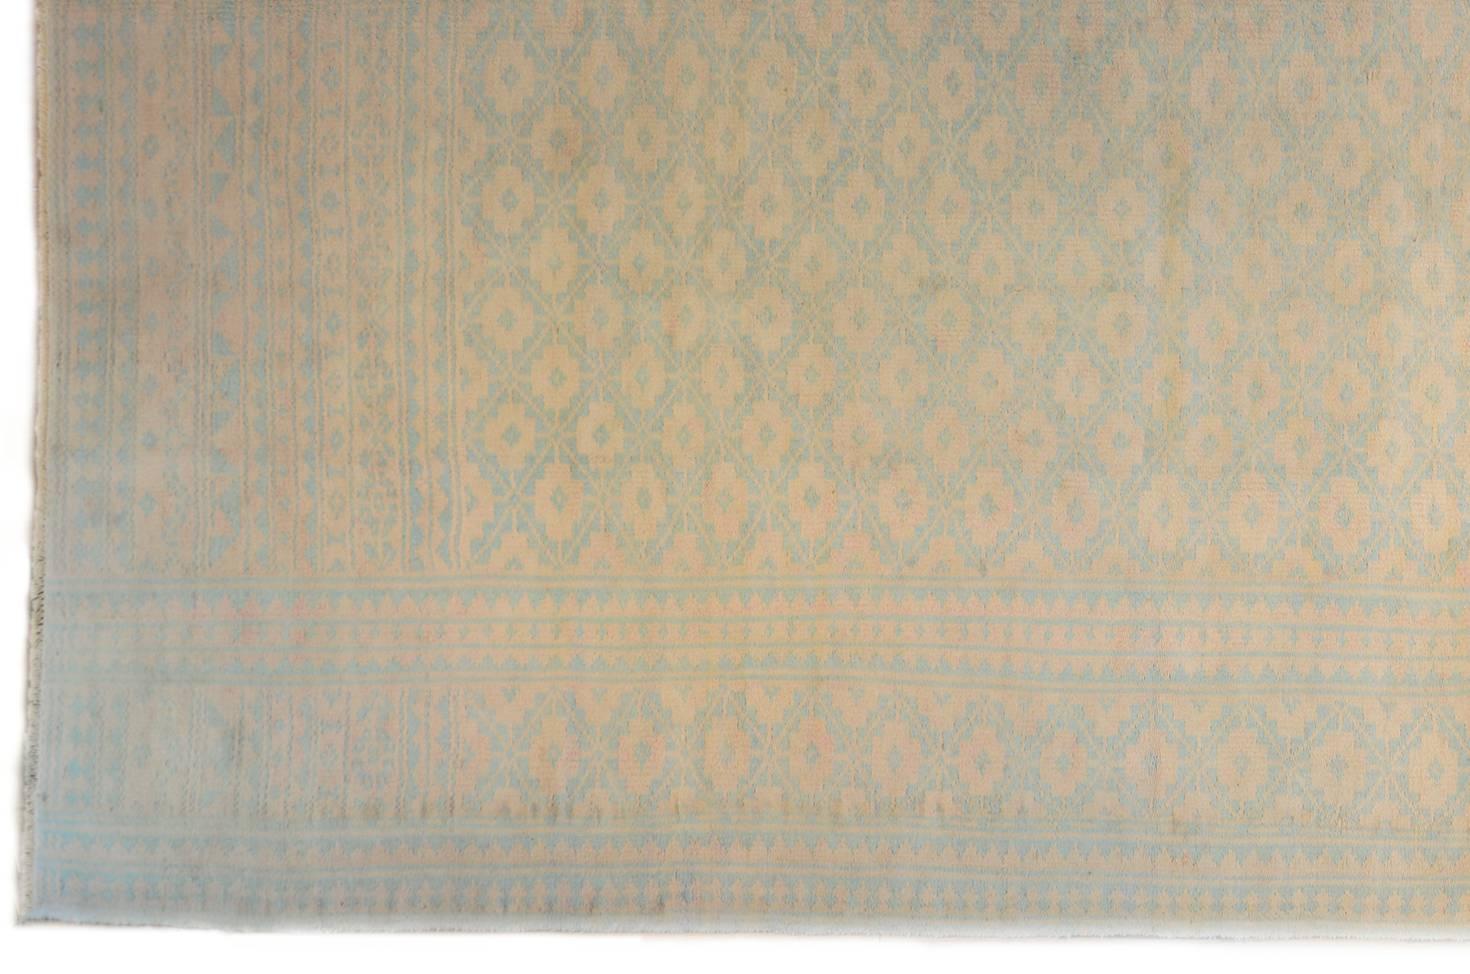 A beautiful early 20th century Persian Yazd kilim rug woven in a pale indigo and cream dyed cotton, with an all-over diamond pattern woven in various sizes. The border is complementary with similarly styled diamond patterns.